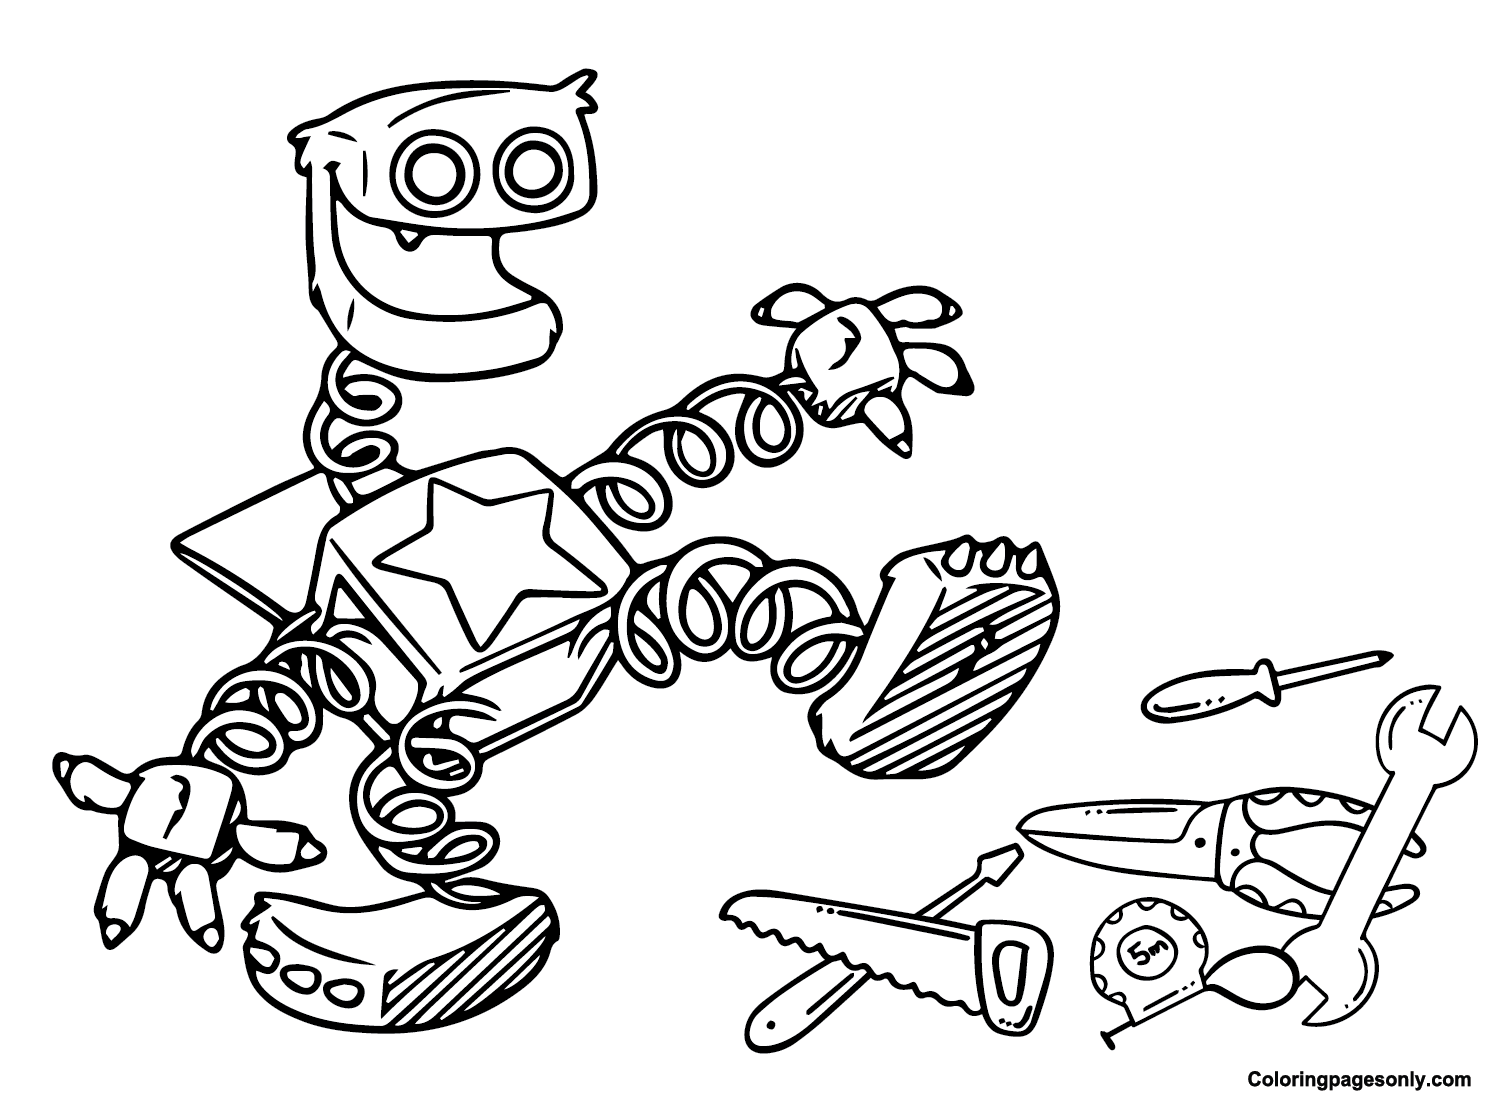 Funny Boxy Boo Coloring Pages